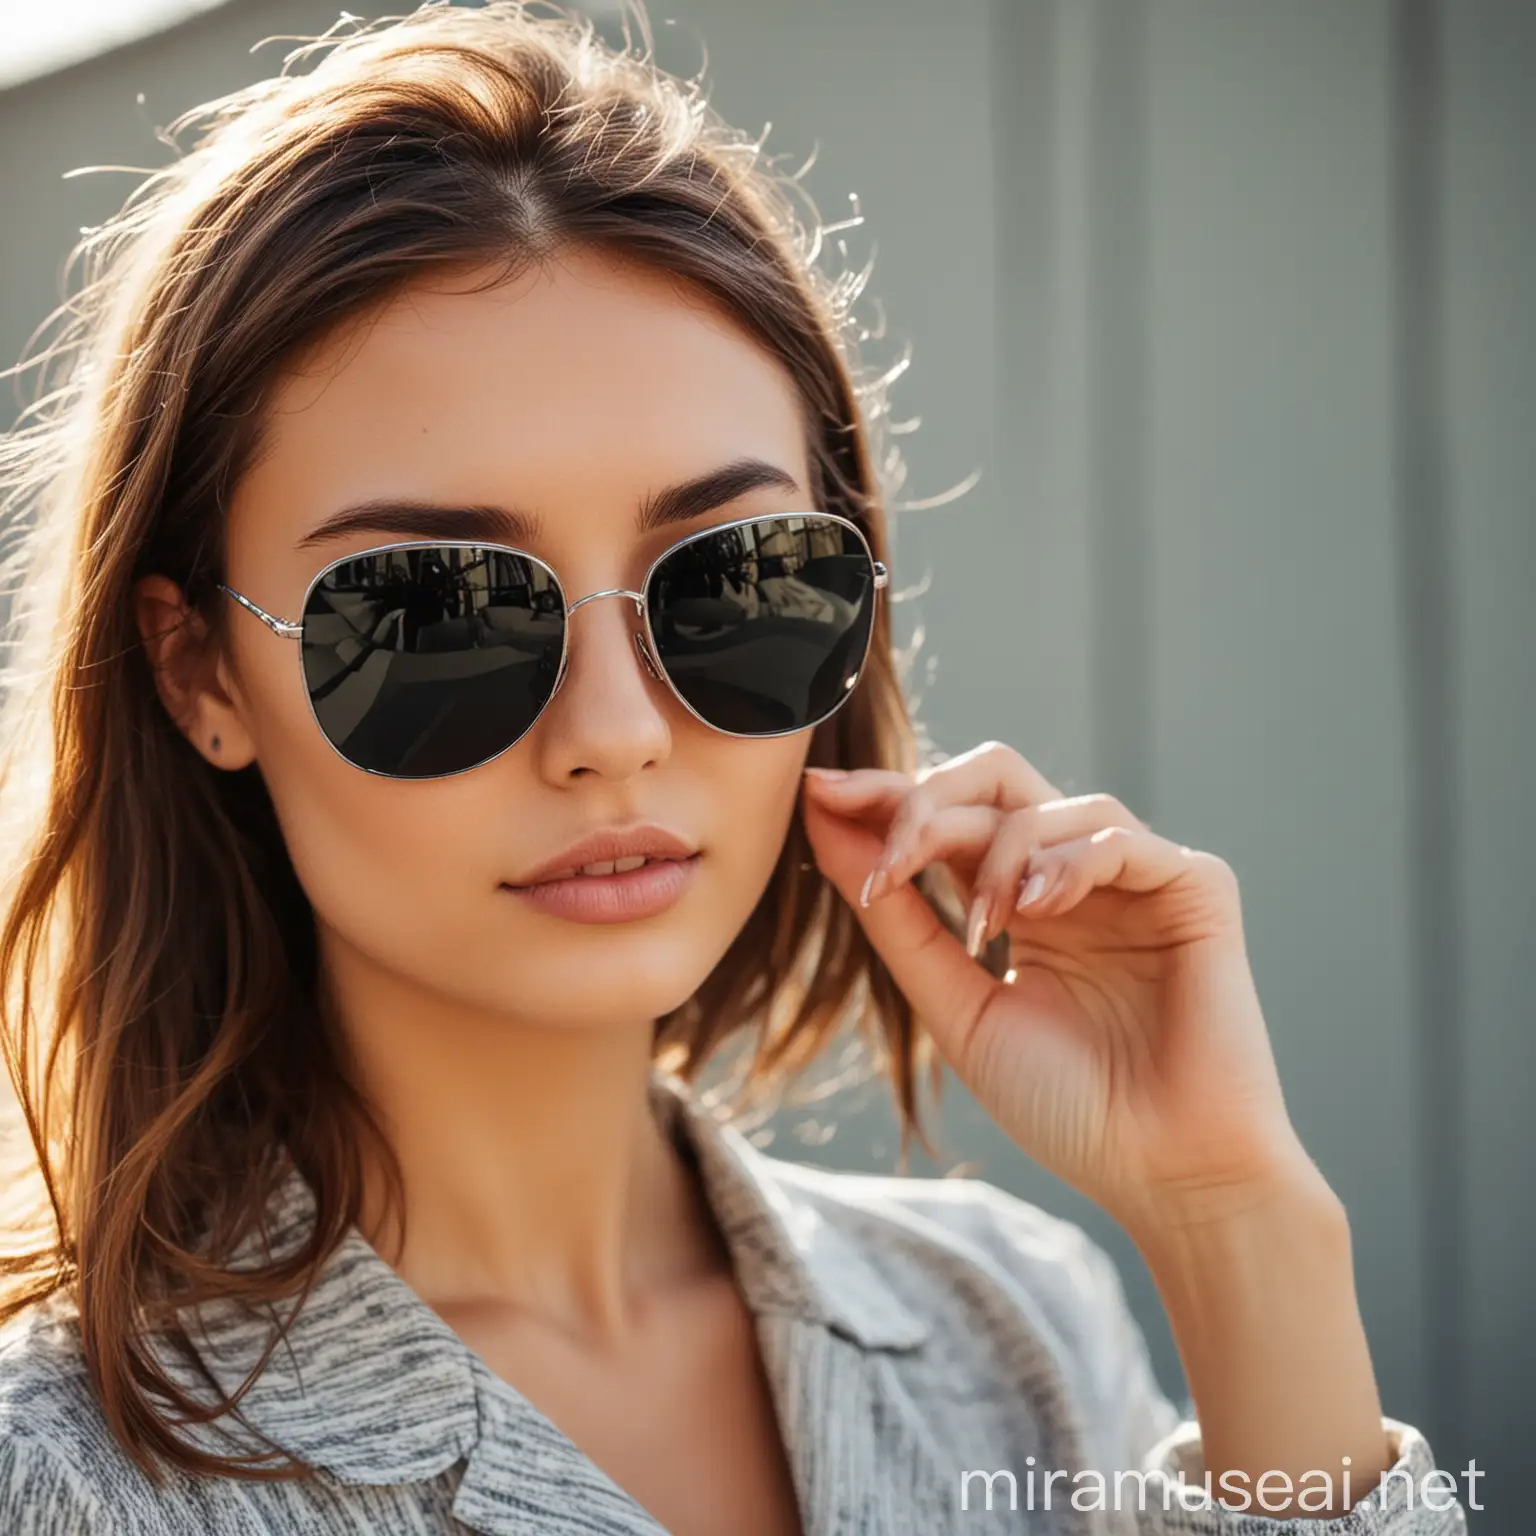 Generate a 2048x540 professional quality photo of model posing wearing sunglasses. Focus on sunglasses.